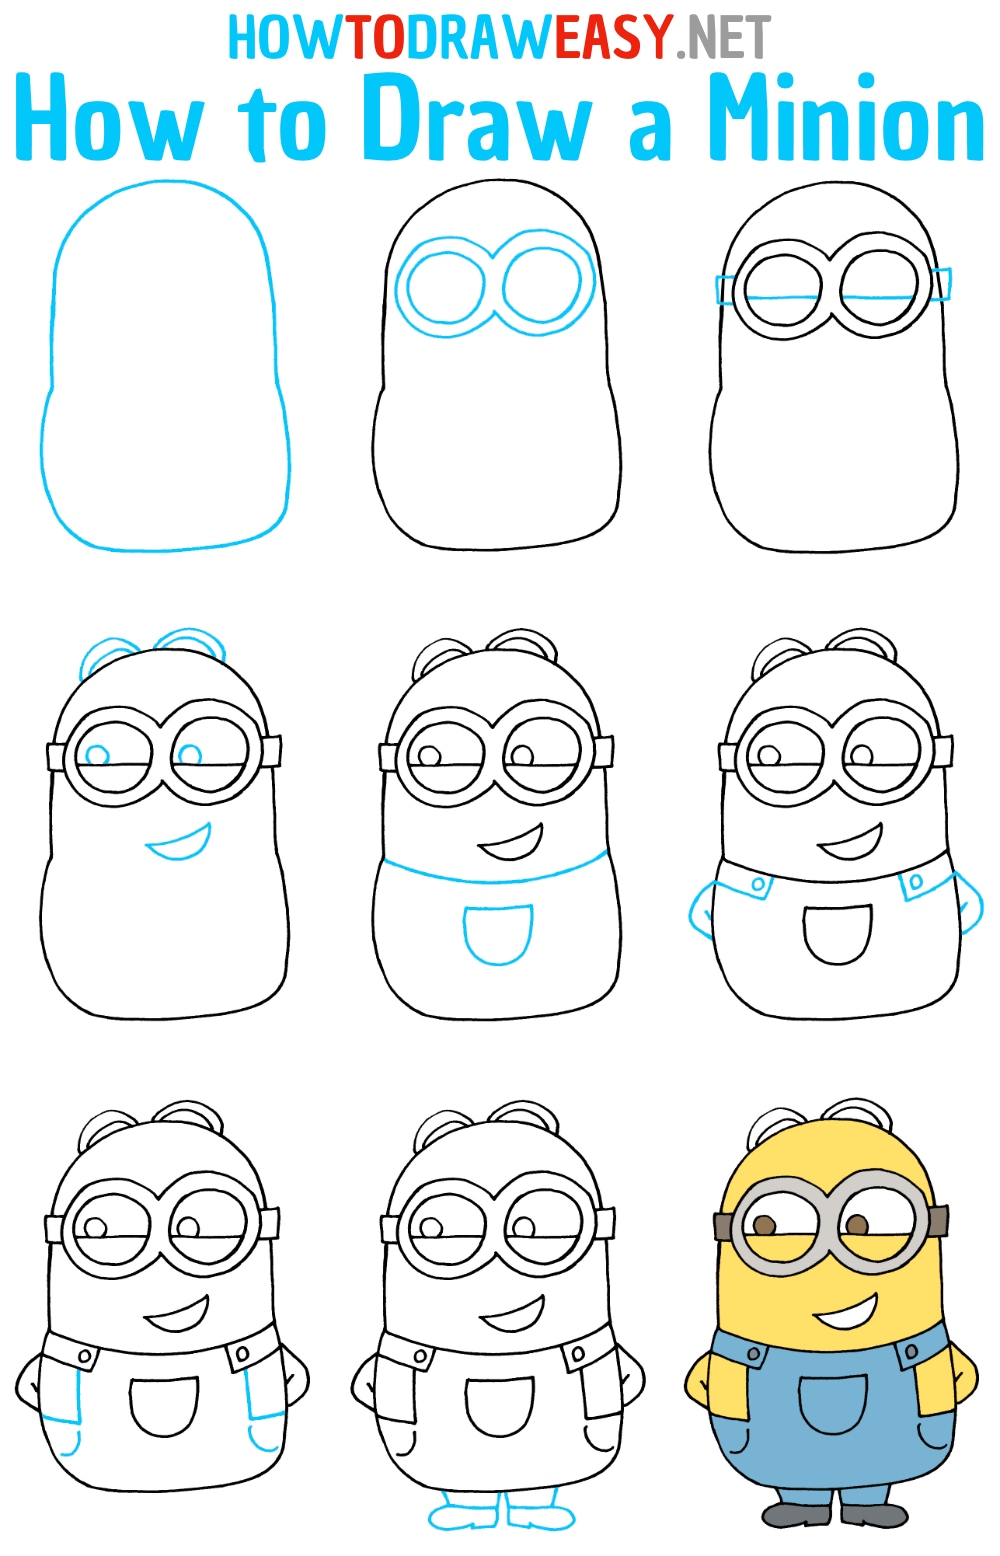 How to Draw a Minion Step by Step